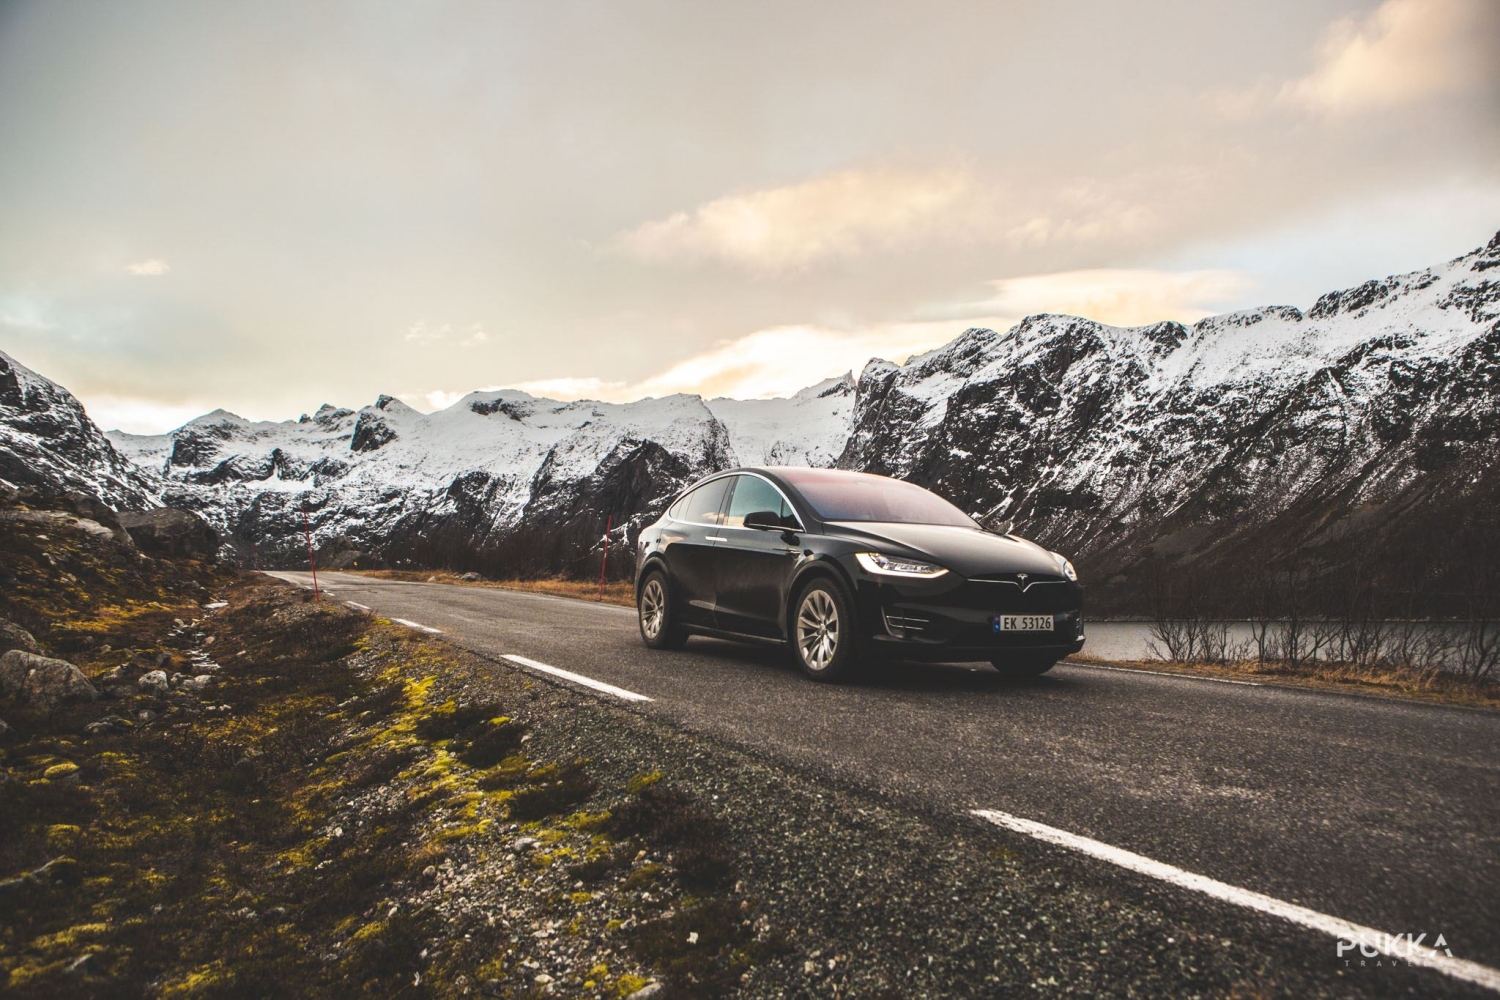 A black Tesla driving on a road with snowy hills in the background